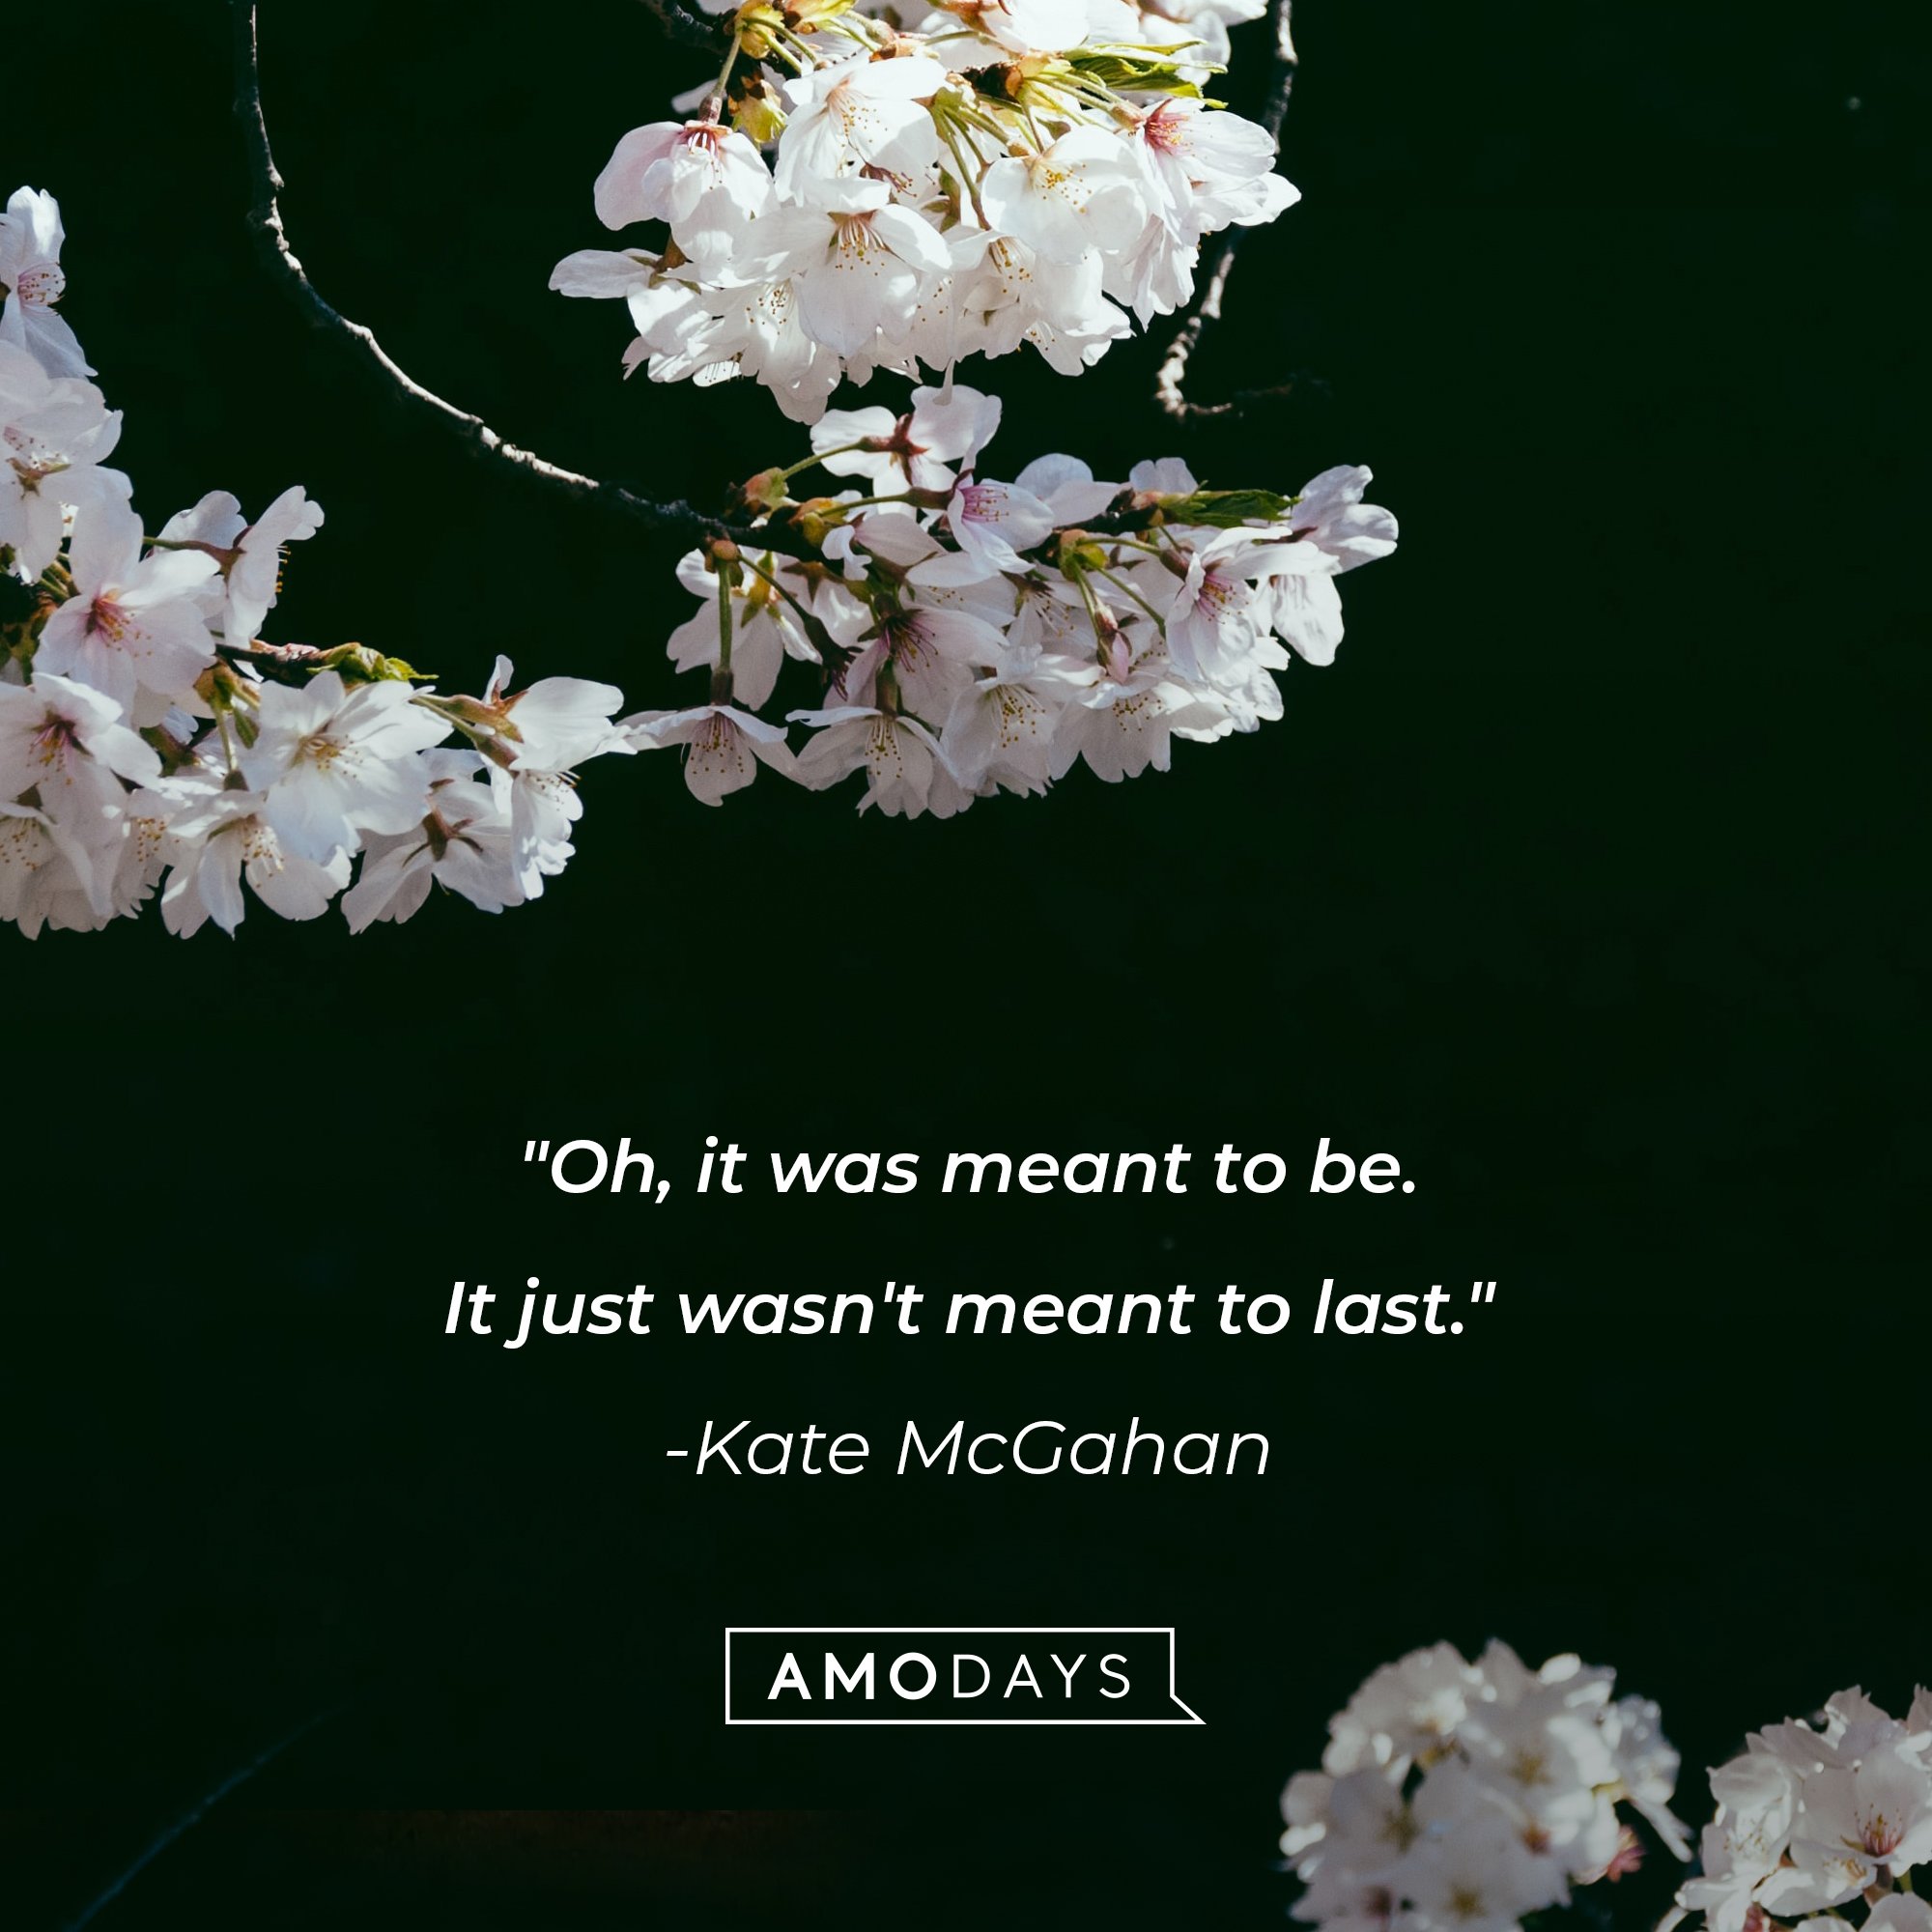 Kate McGahan’s quote: "Oh, it was meant to be. It just wasn't meant to last."  | Image: AmoDays